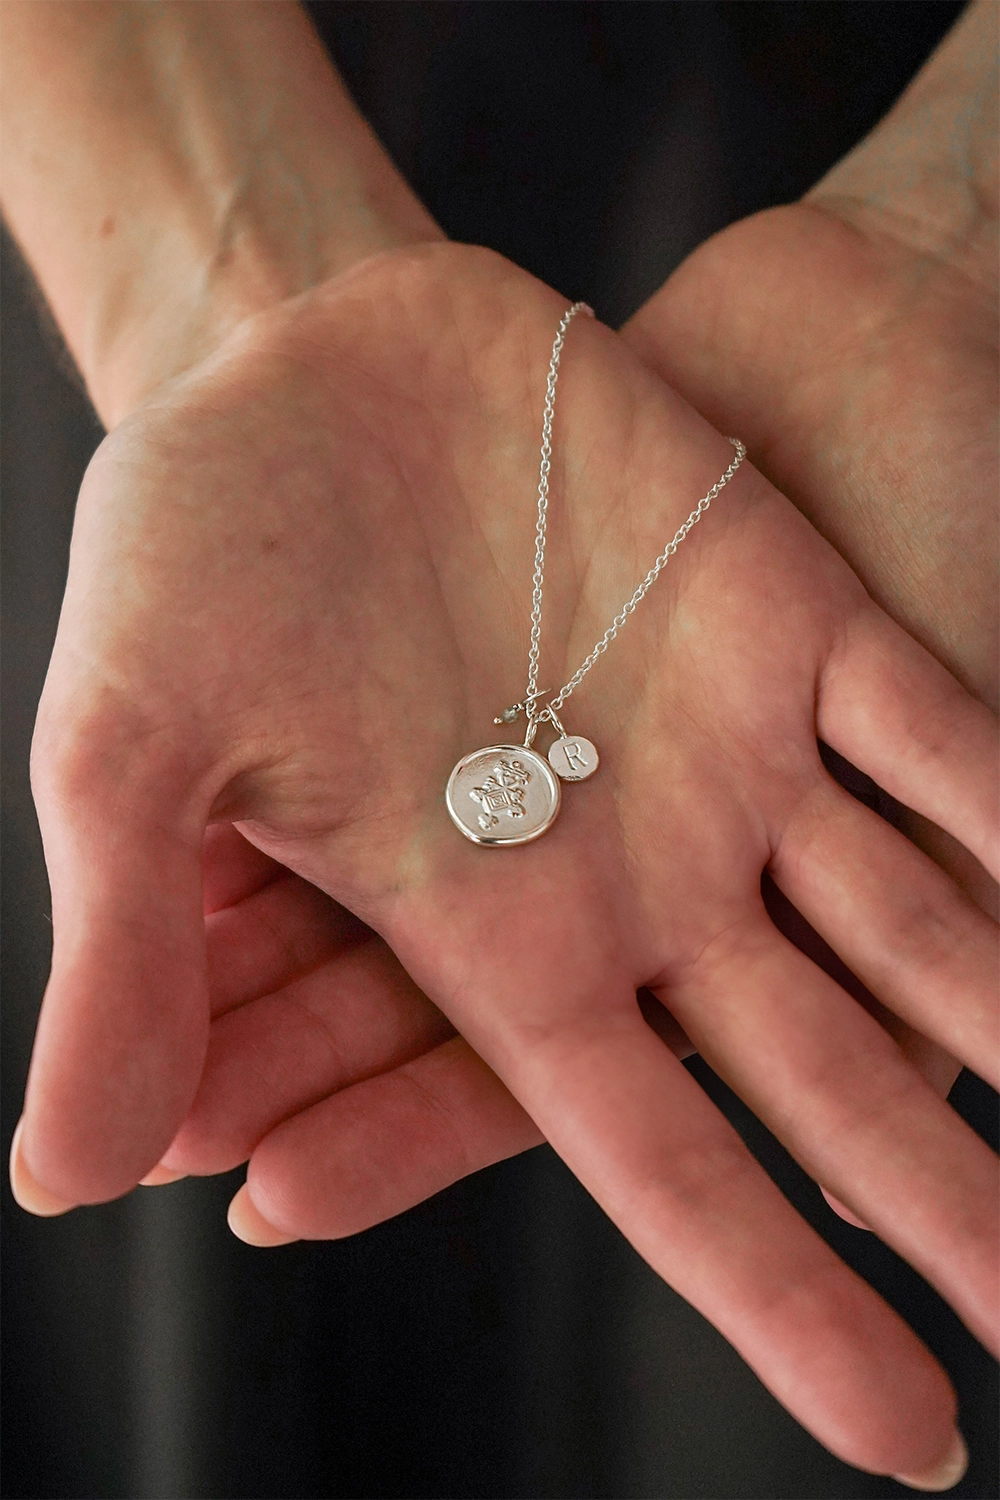 Nested hands holding a silver pendant for a bridesmaid gift.